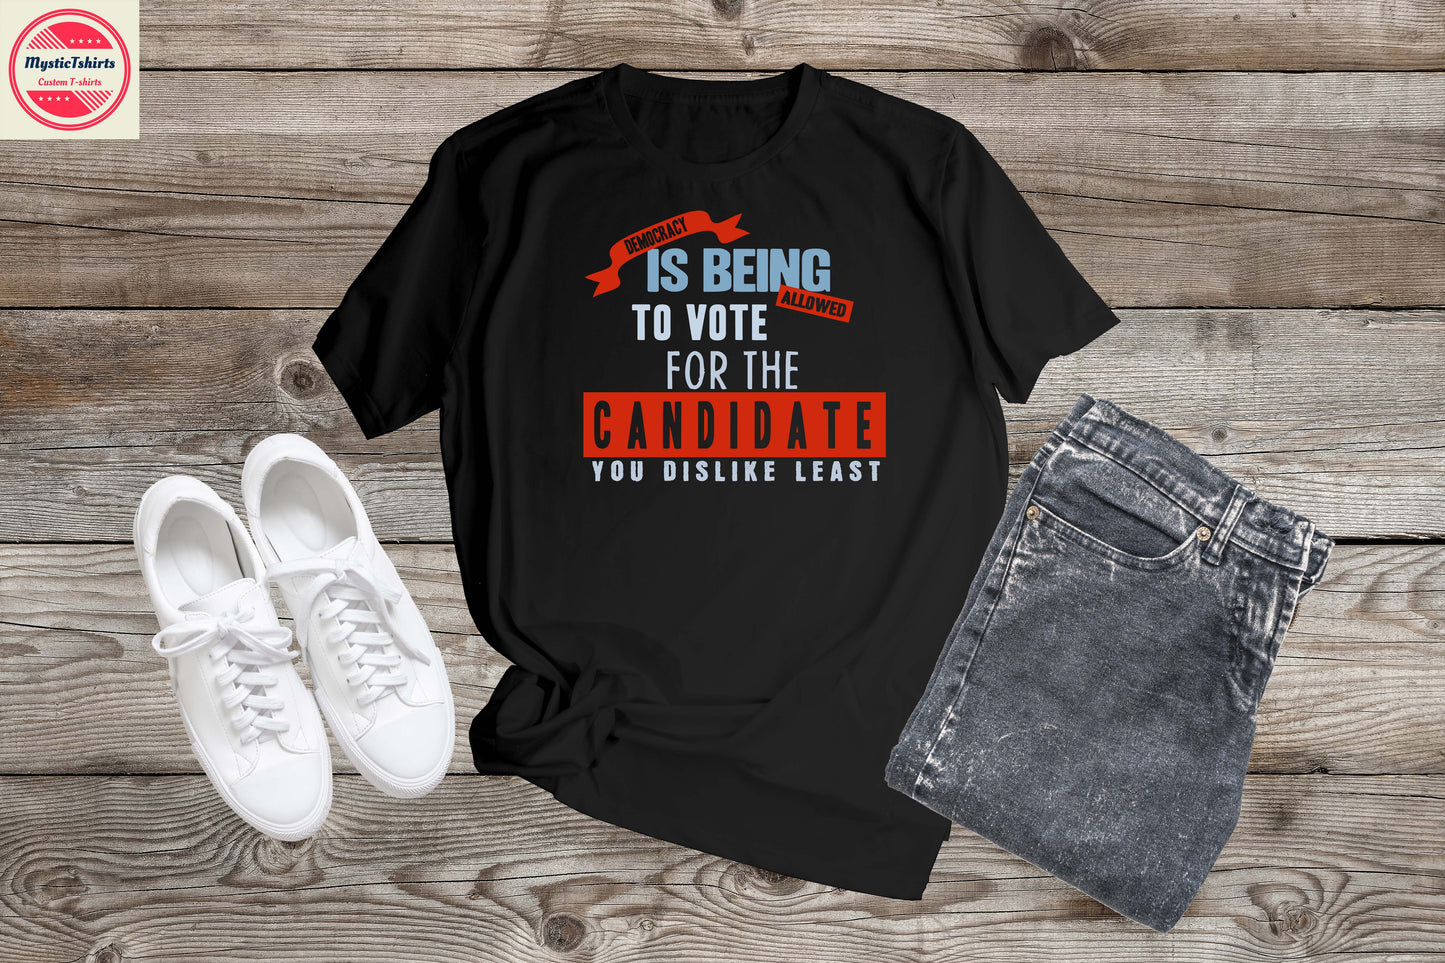 109. DEMOCRACY IS BEING ALLOWED TO VOTE, Custom Made Shirt, Personalized T-Shirt, Custom Text, Make Your Own Shirt, Custom Tee